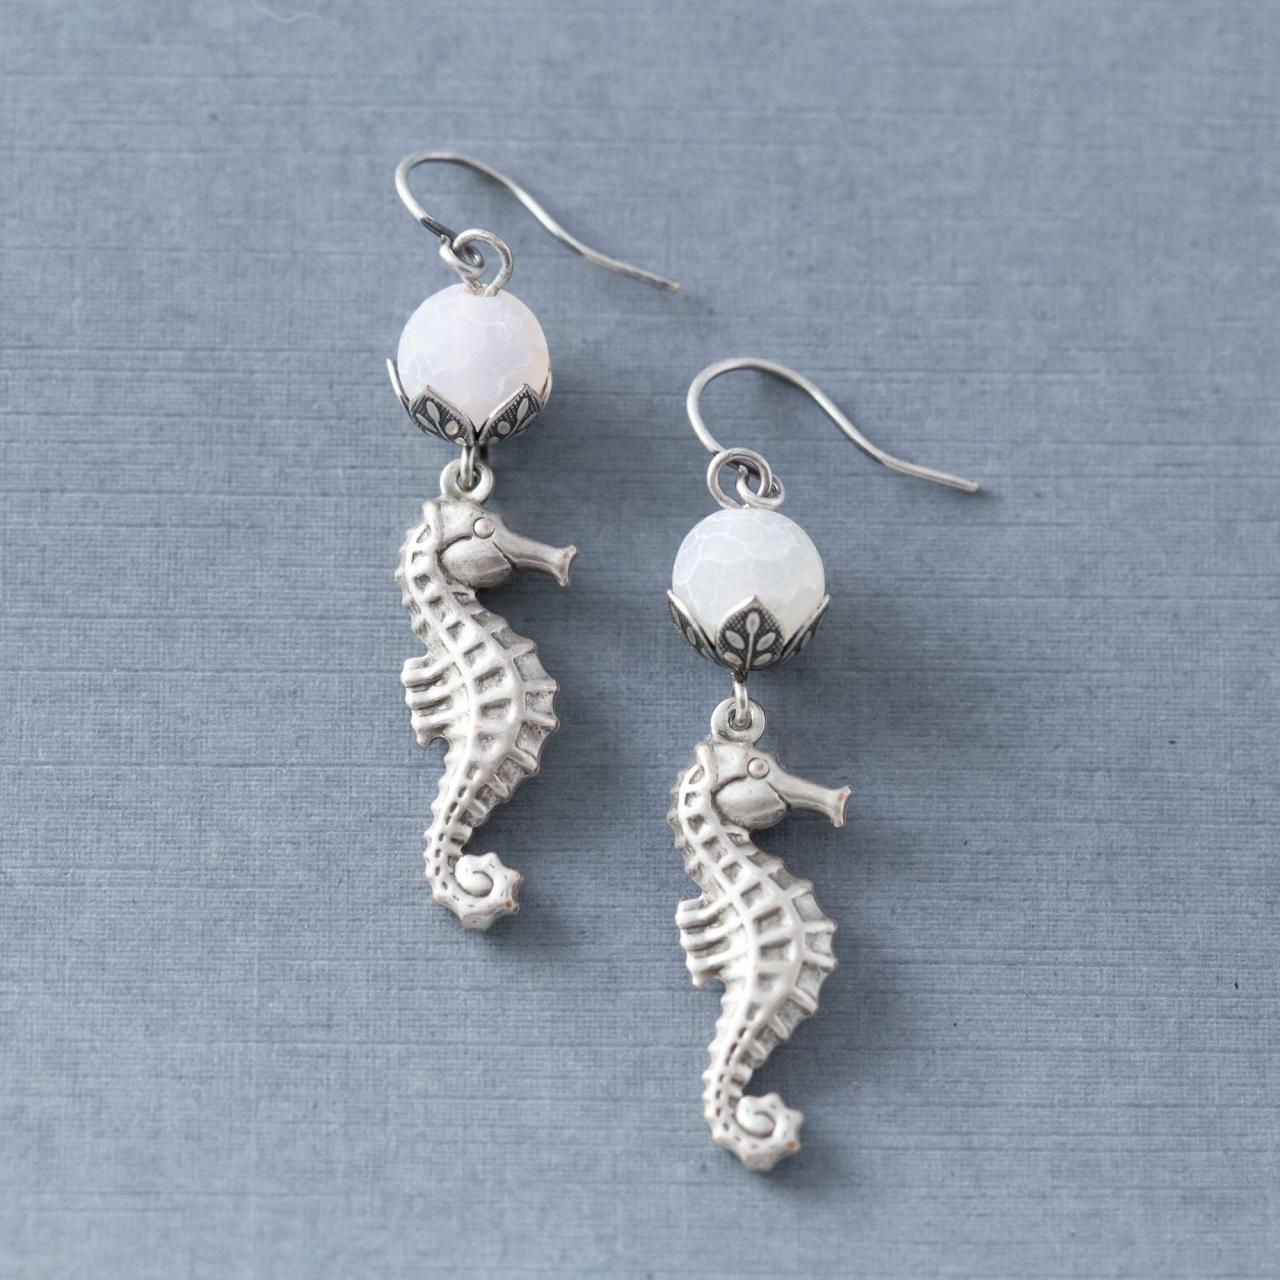 Antiqued Silver Seahorse Earrings With White Agate Beads And Flower Bead Caps, Beach Jewelry, Sea Jewelry